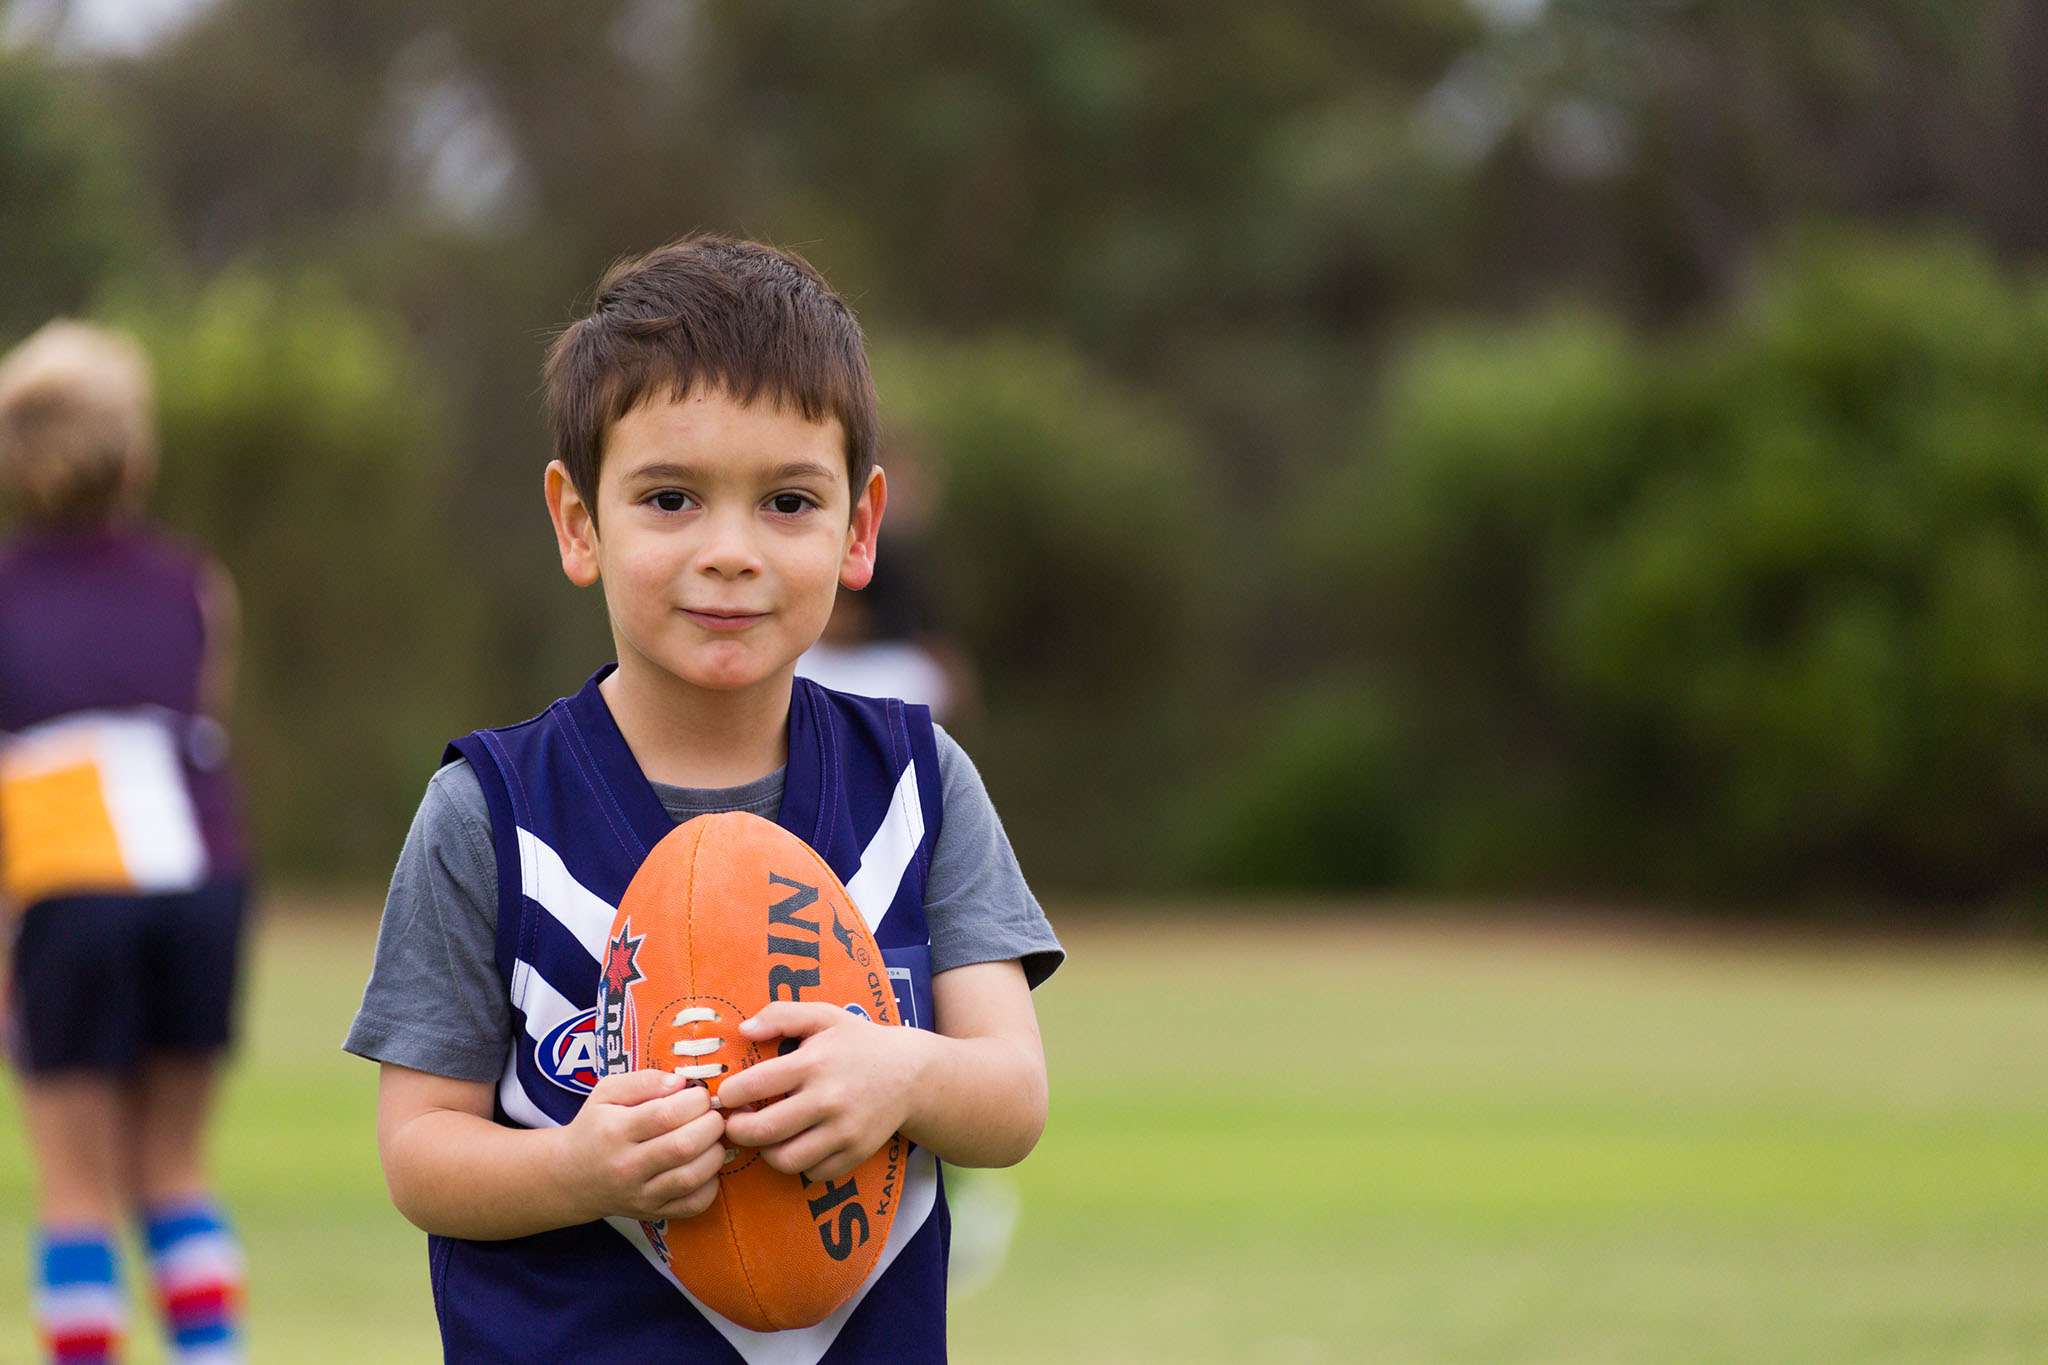 Photo of a young boy holding his football